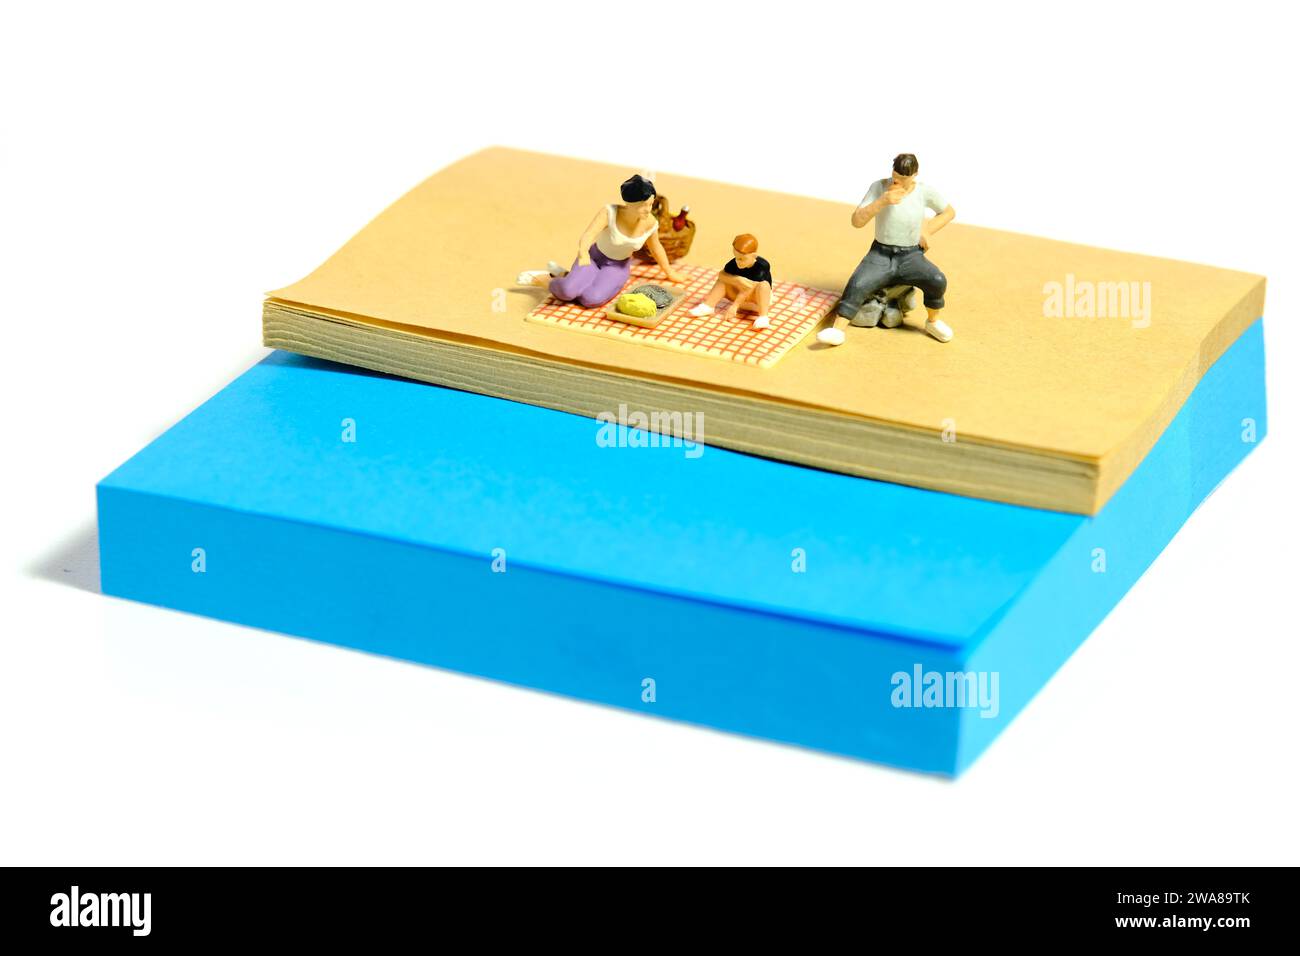 Creative miniature people toy figure photography. Sticky notes installation. Family picnic time at river on summer holiday. Stock Photo